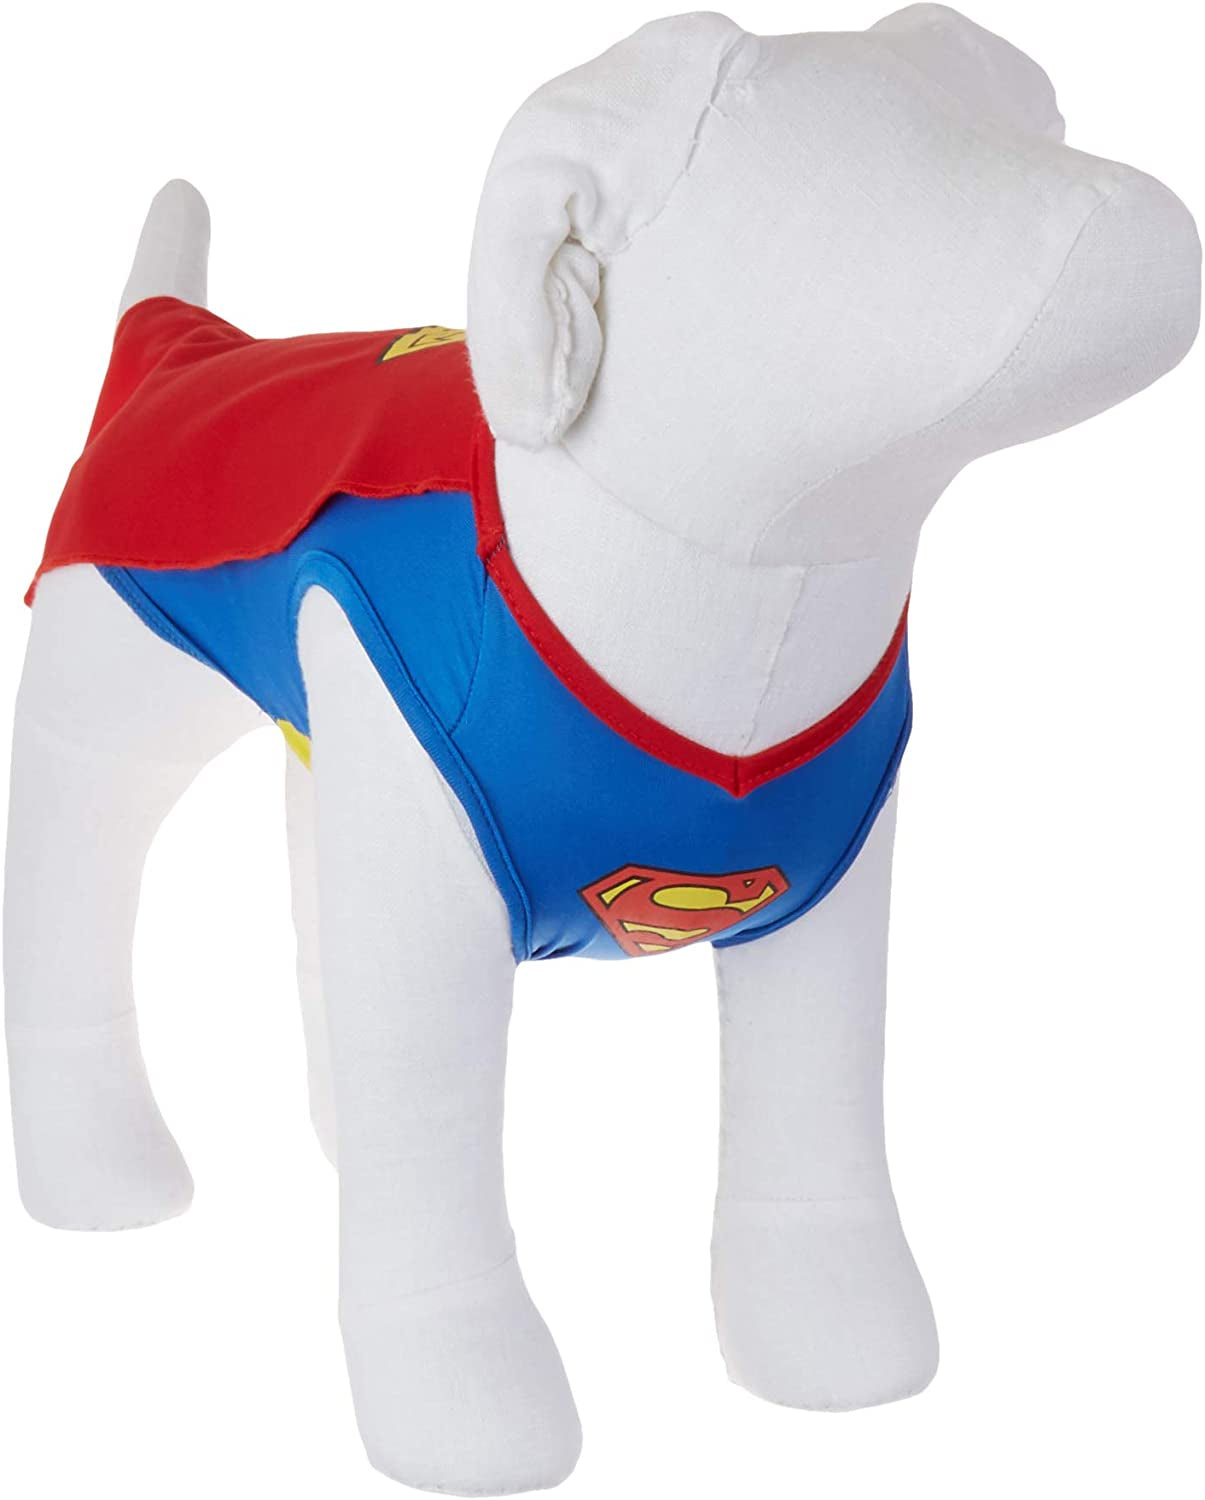 DC Comics Superman Dog Costume, Small (S) | Superhero Costume for Dogs | Red and Blue Dog Halloween Costumes for Small Dogs with Superman Cape | See Sizing Chart for Details Animals & Pet Supplies > Pet Supplies > Dog Supplies > Dog Apparel Fetch for Pets Large  